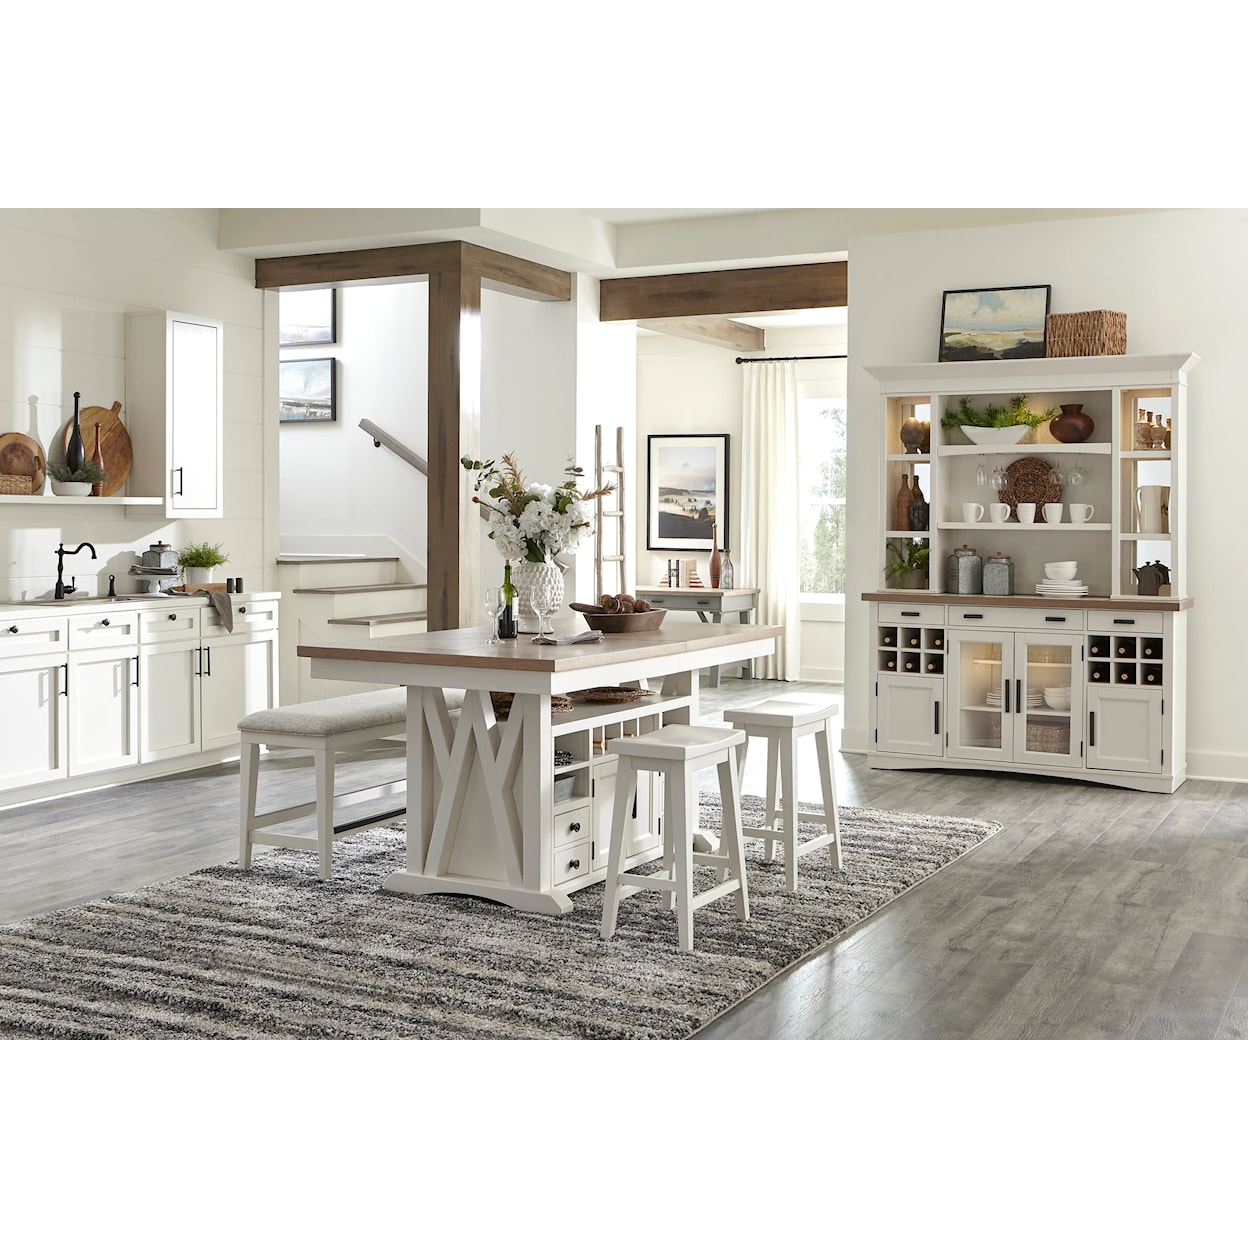 Center Island with Kitchen Mixer Lift with Shelf - Transitional